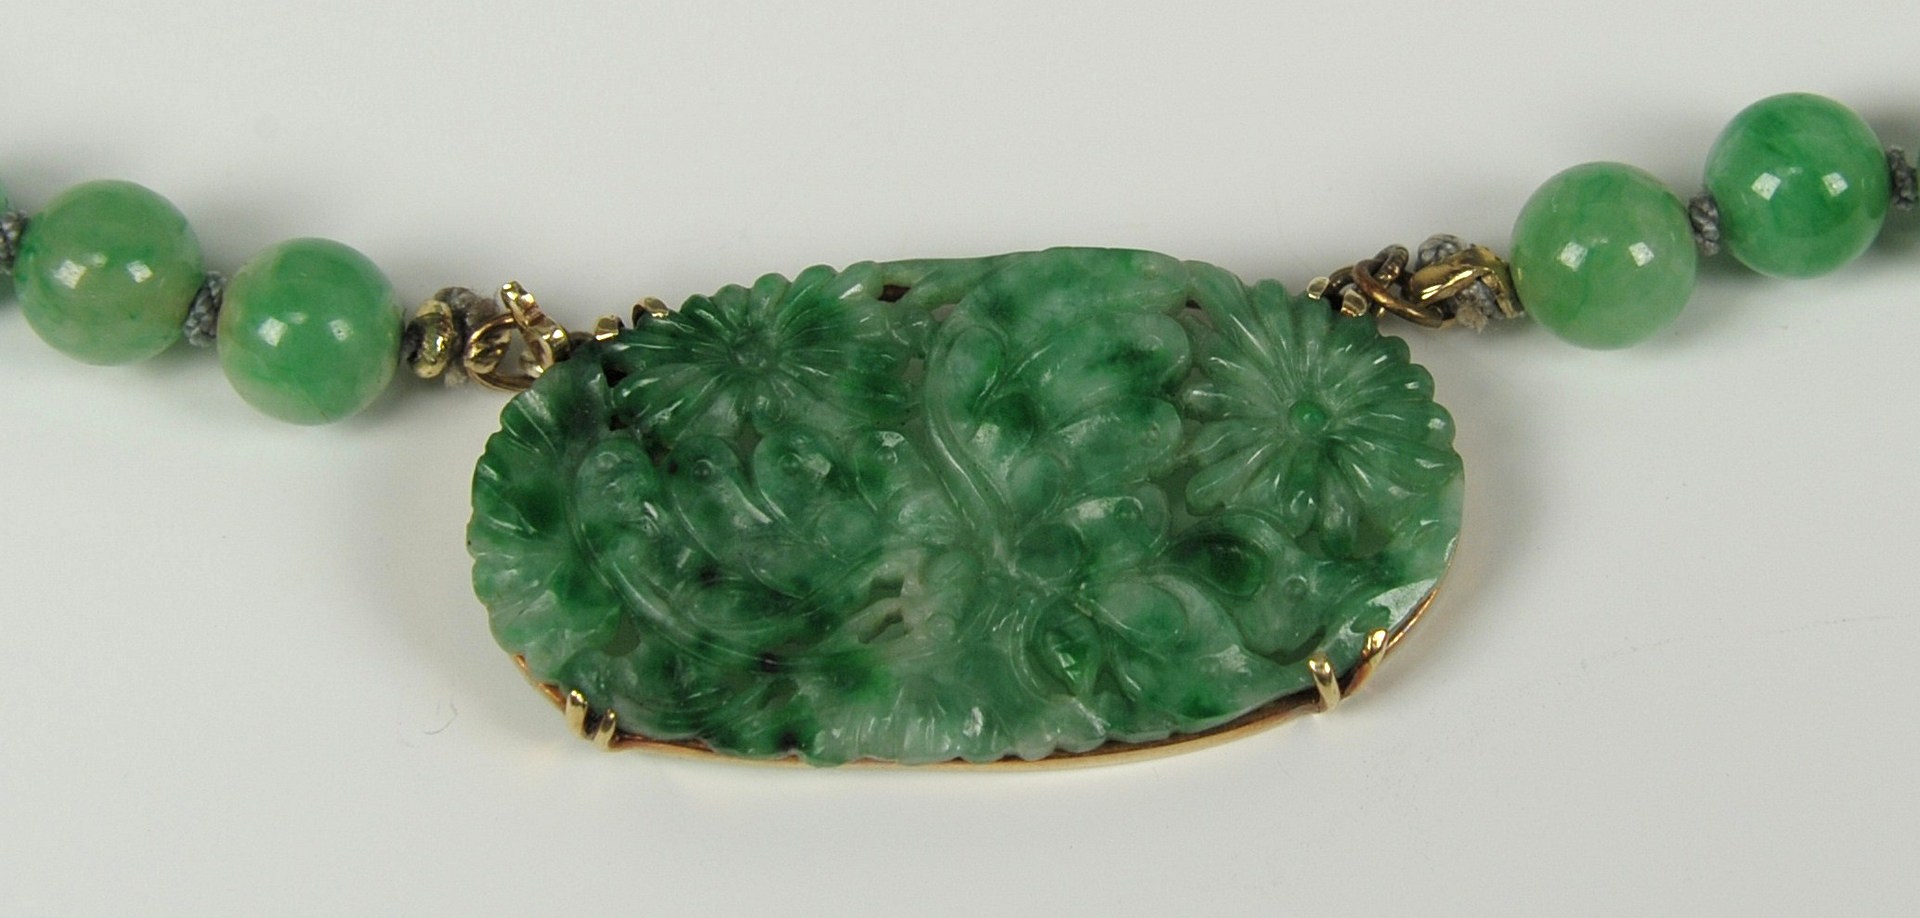 Lot 213: Two Jade and gold necklaces